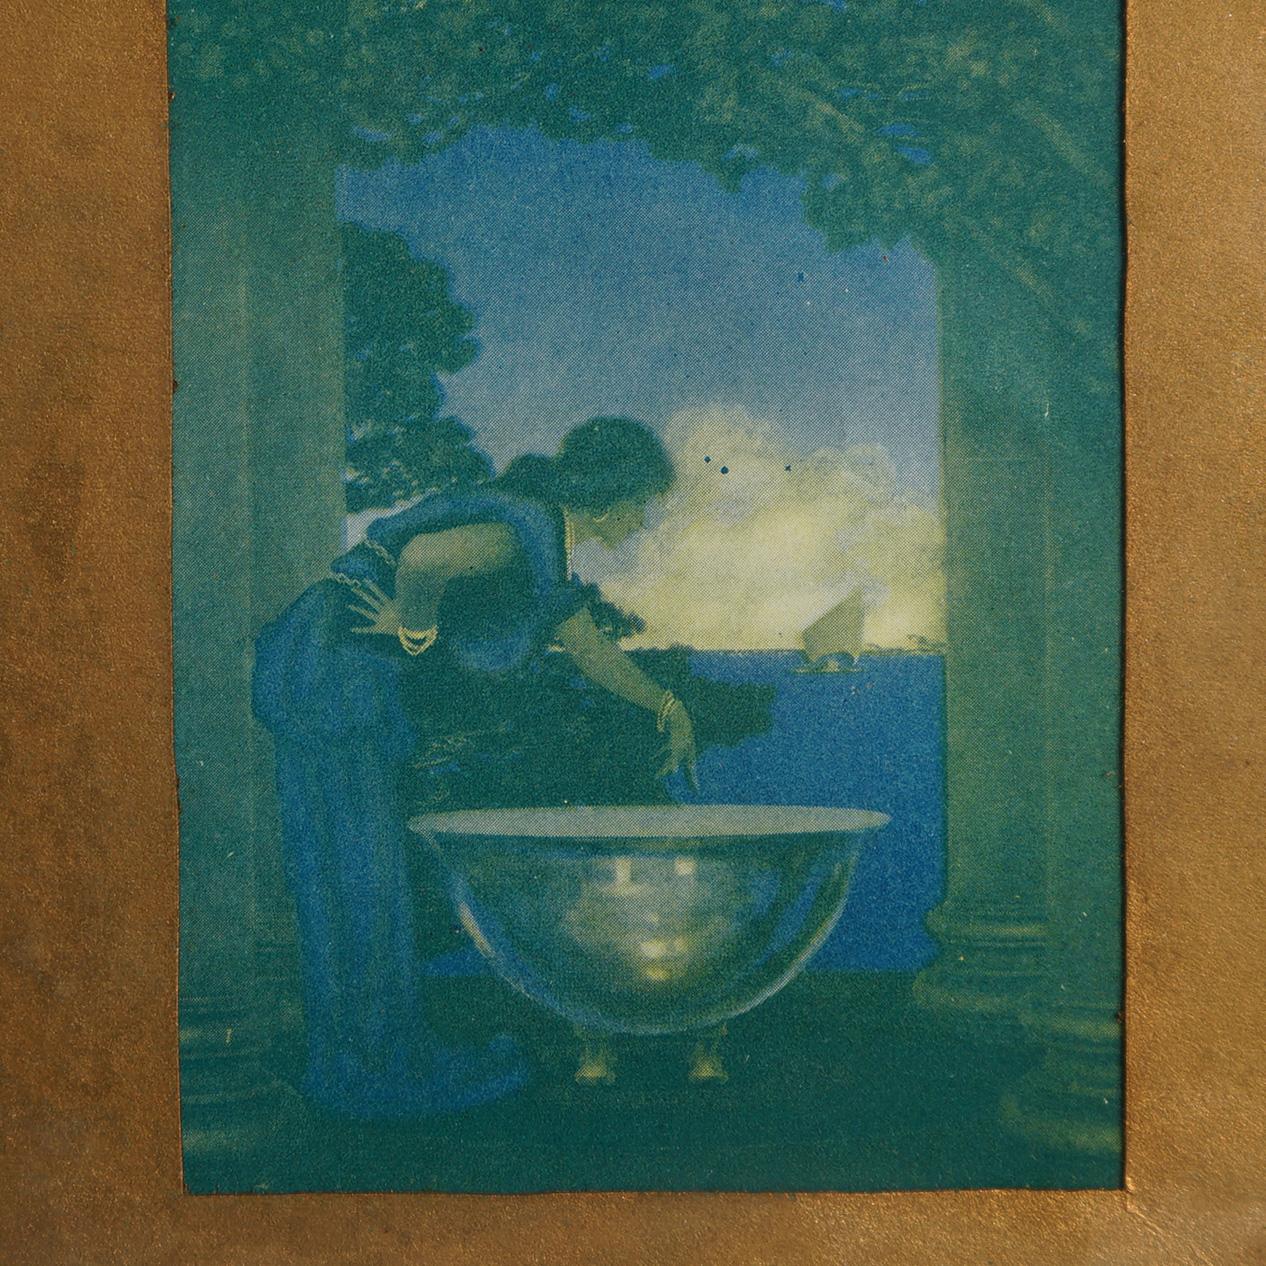 Three Art Deco Maxfield Parrish Prints Including “The Prince” C1920 In Good Condition For Sale In Big Flats, NY